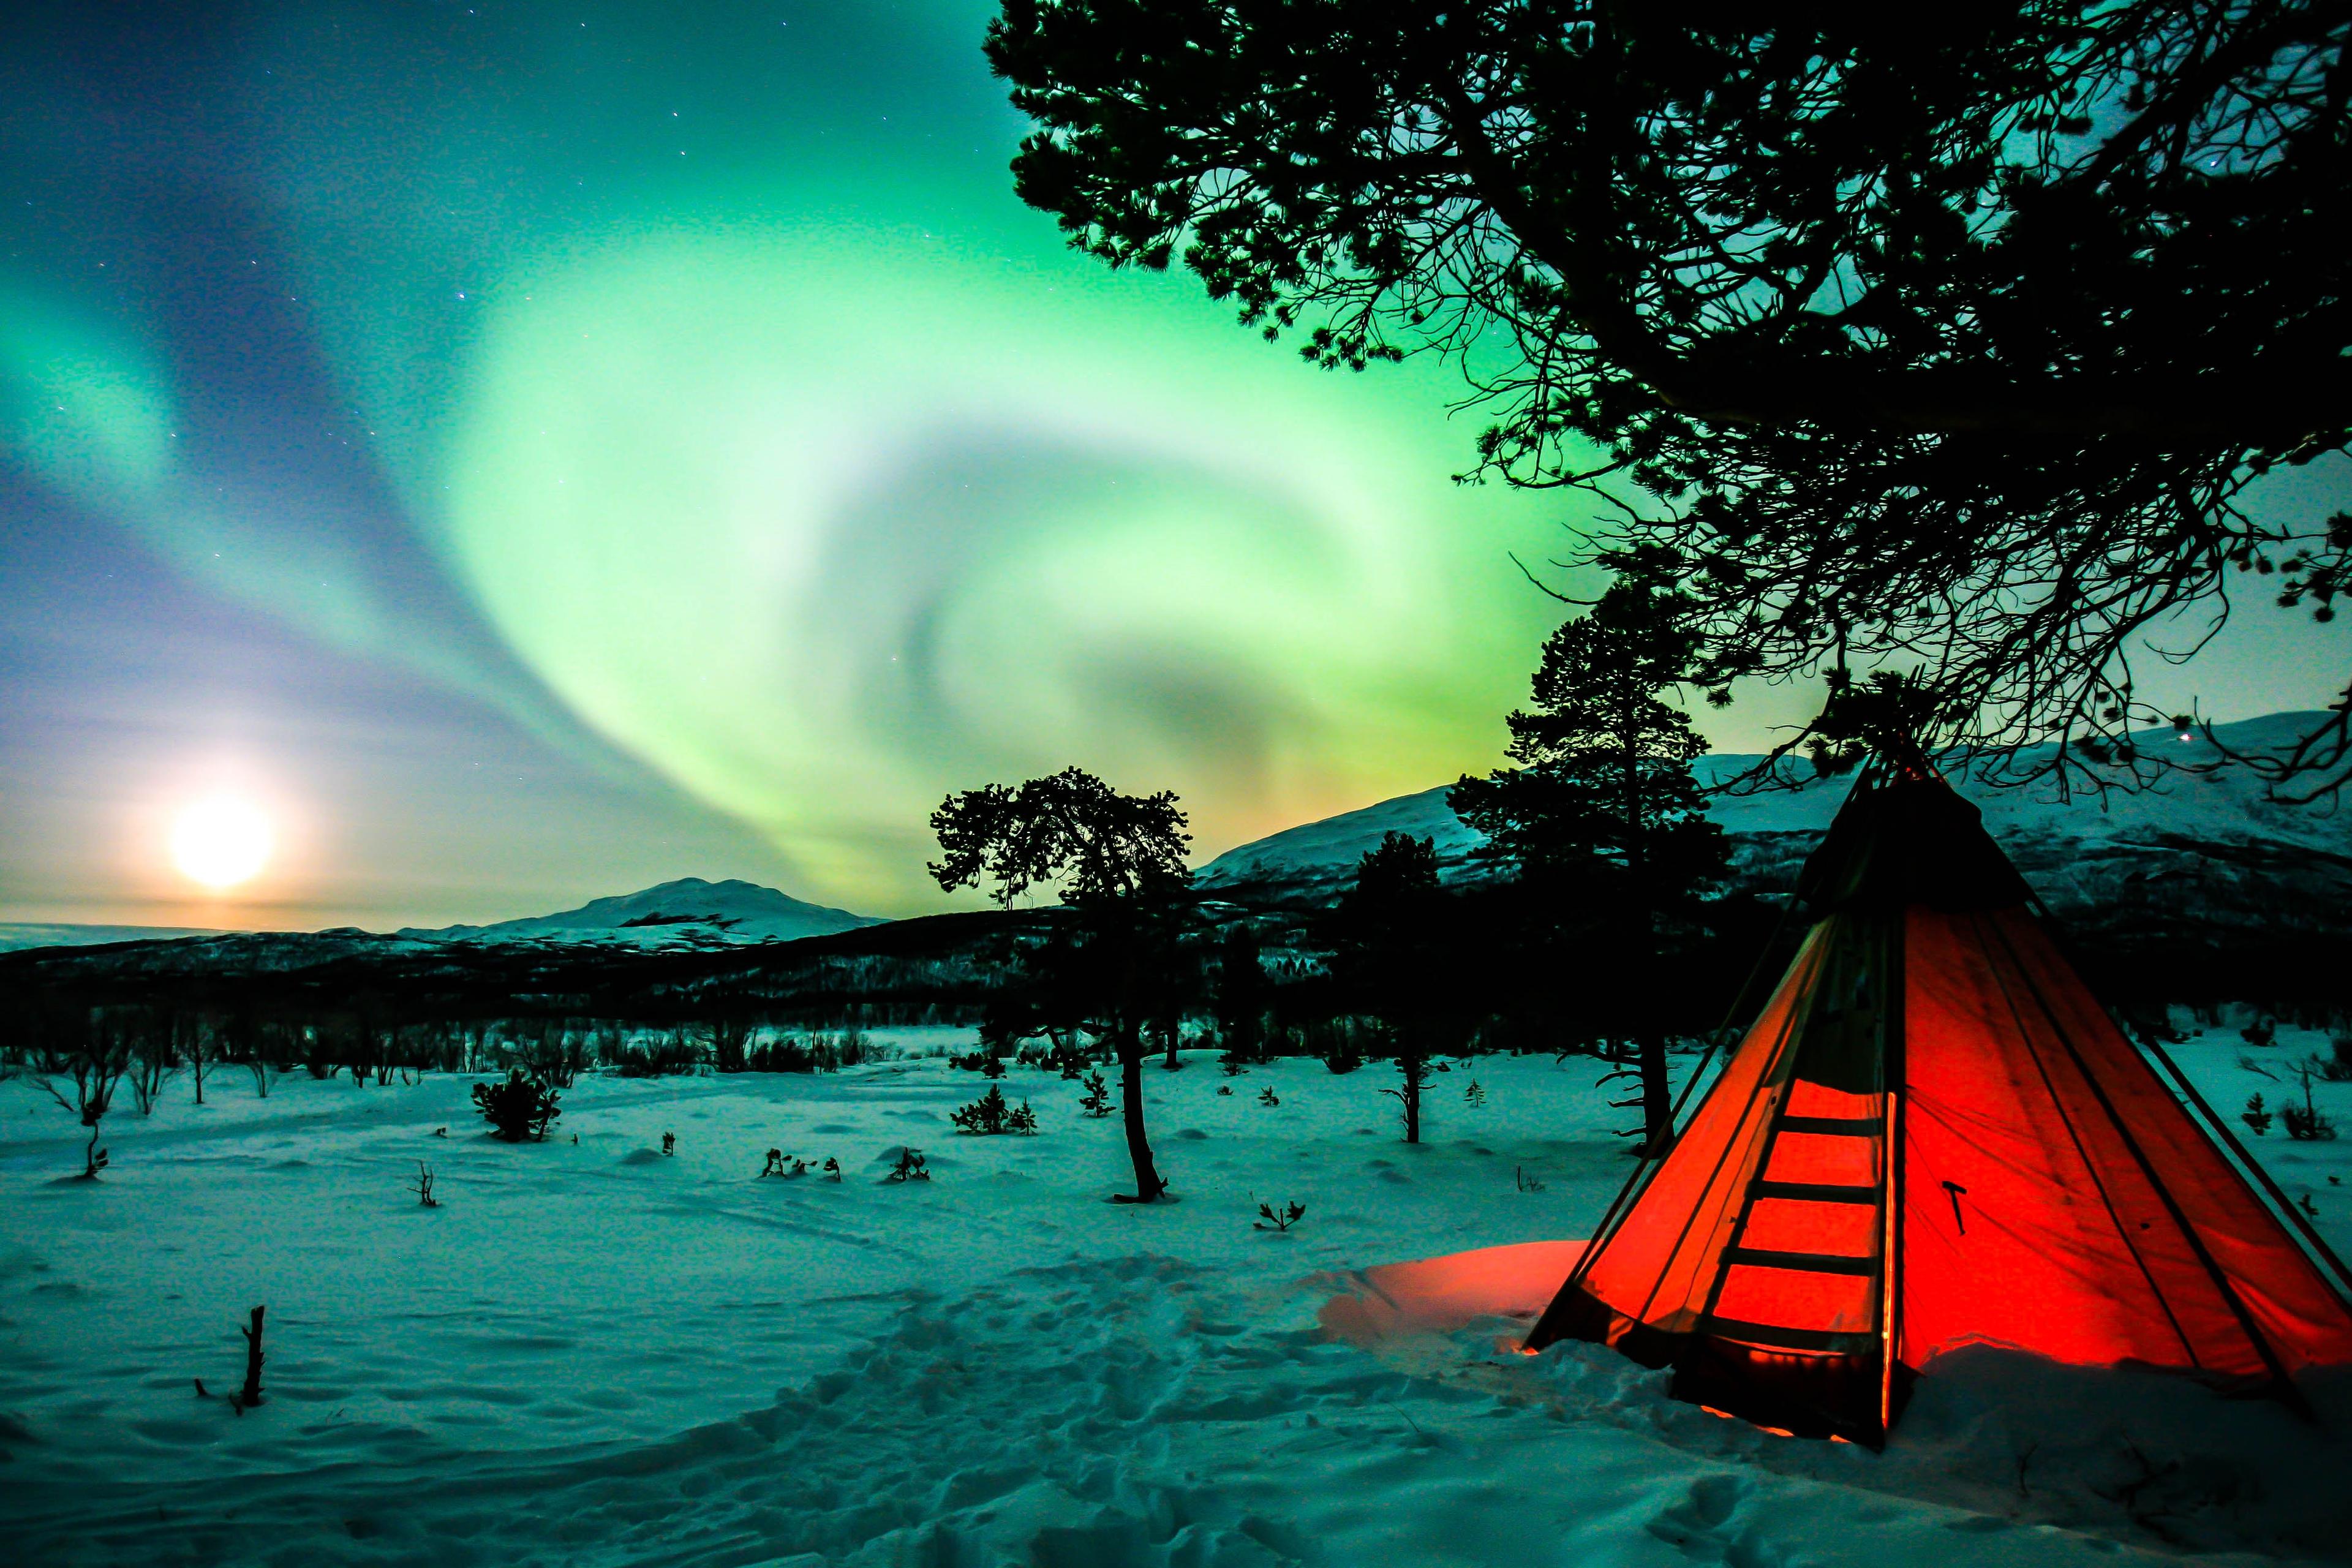 A glowing tent under the swirling green Northern Lights in a snowy landscape, with a tree silhouetted against the twilight sky and the moon rising in the background.